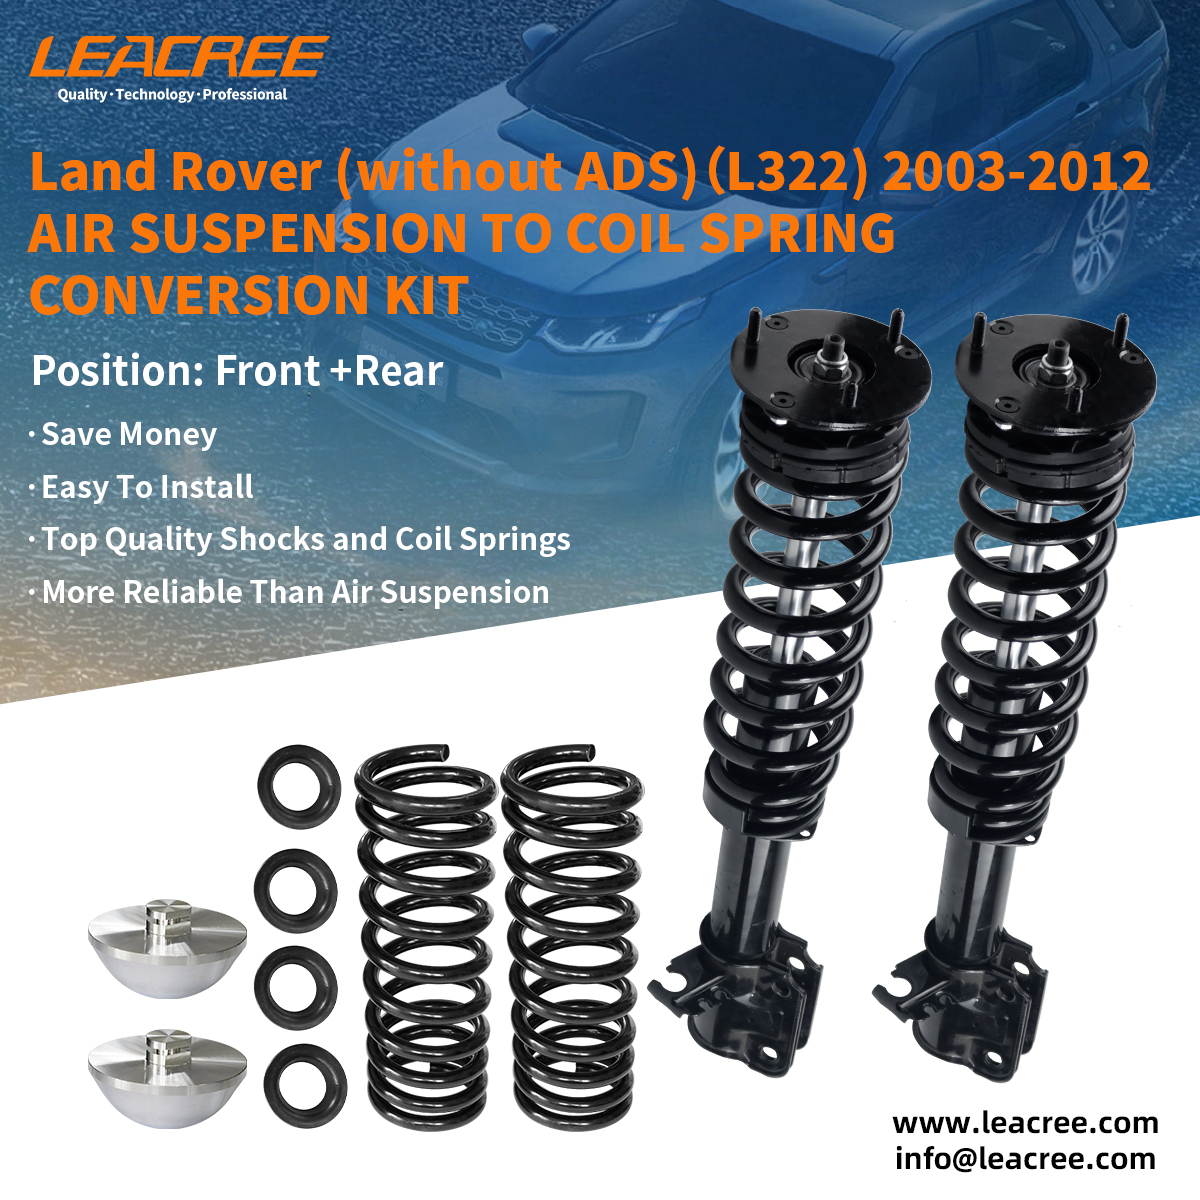 LEACREE STORY: PROFESSIONAL SHOCK ABSORBER MANUFACTURER